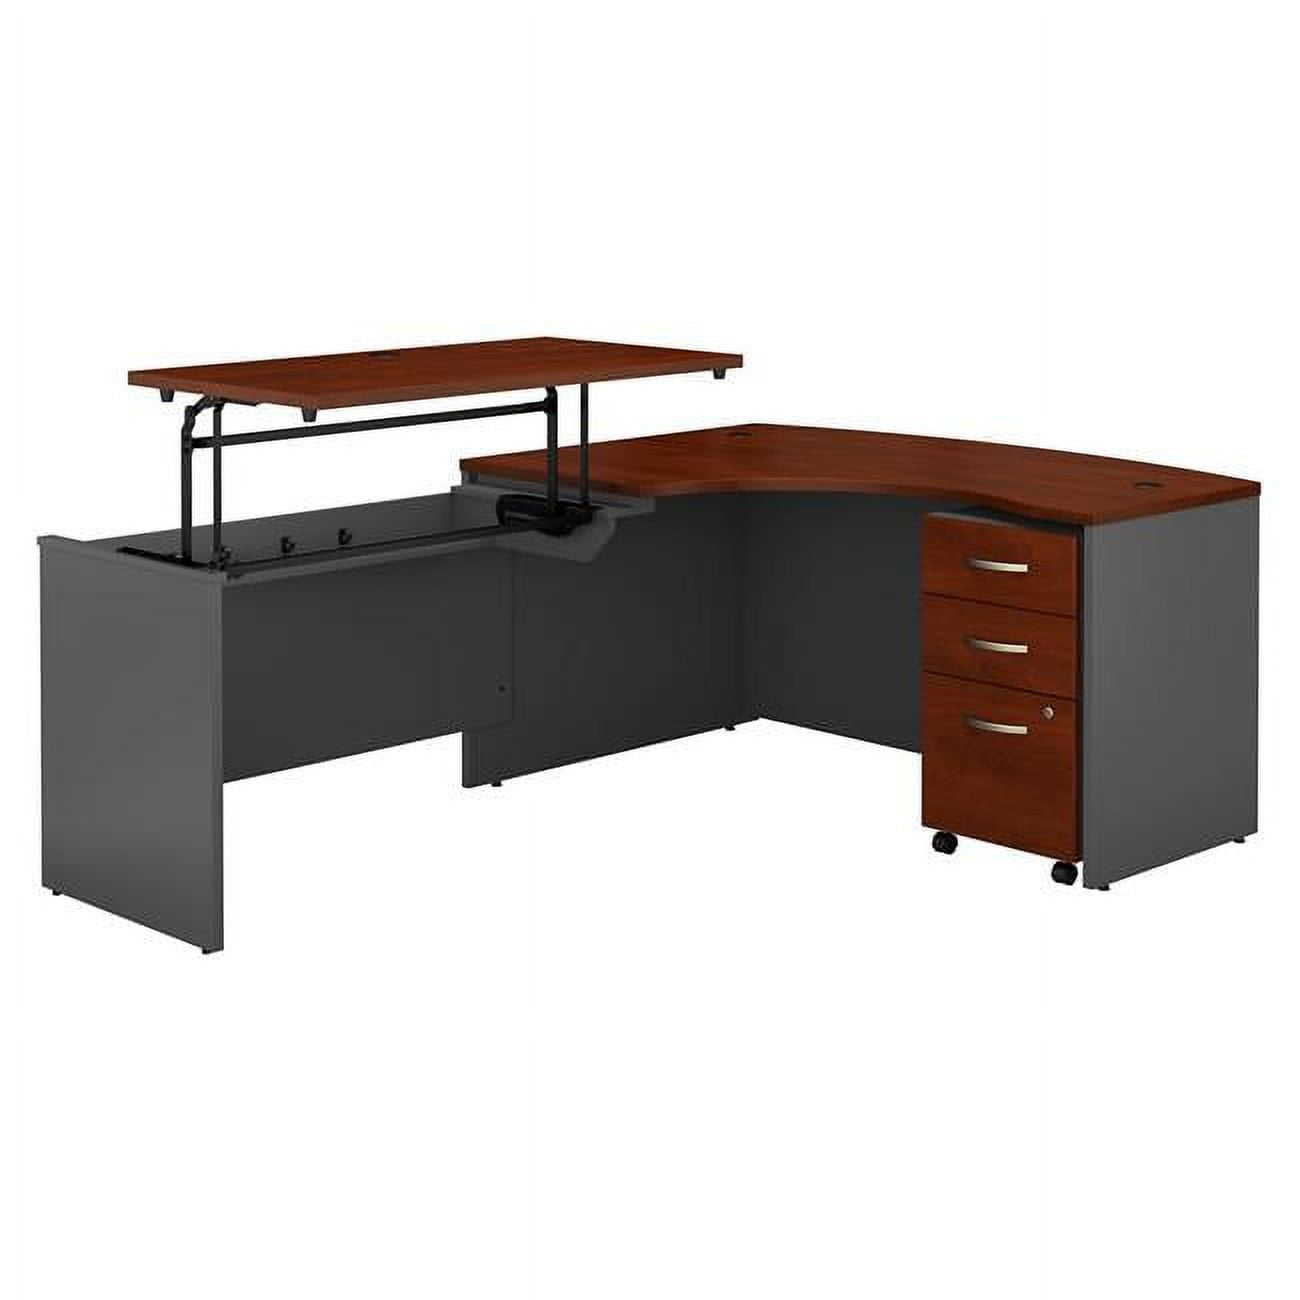 Picture of Bush Business Furniture SRC127HCSU 60 x 43 in. Series C Left Hand 3 Position Sit to Stand L-Shaped Desk with Mobile File Cabinet - Hansen Cherry